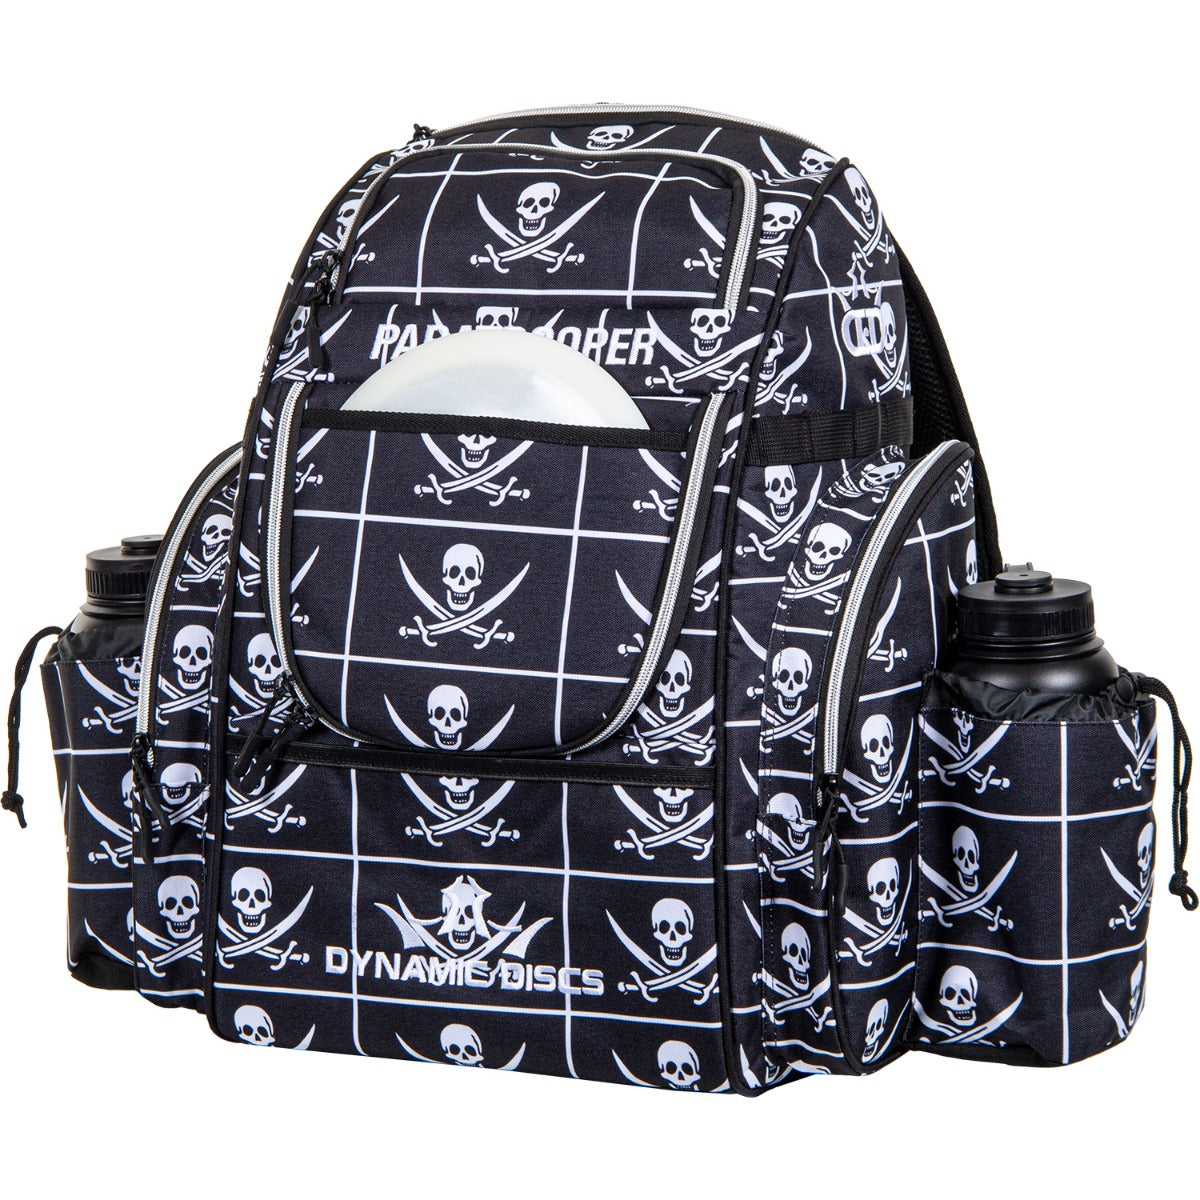 Limited Edition Flag Dynamic Discs Paratrooper Backpack